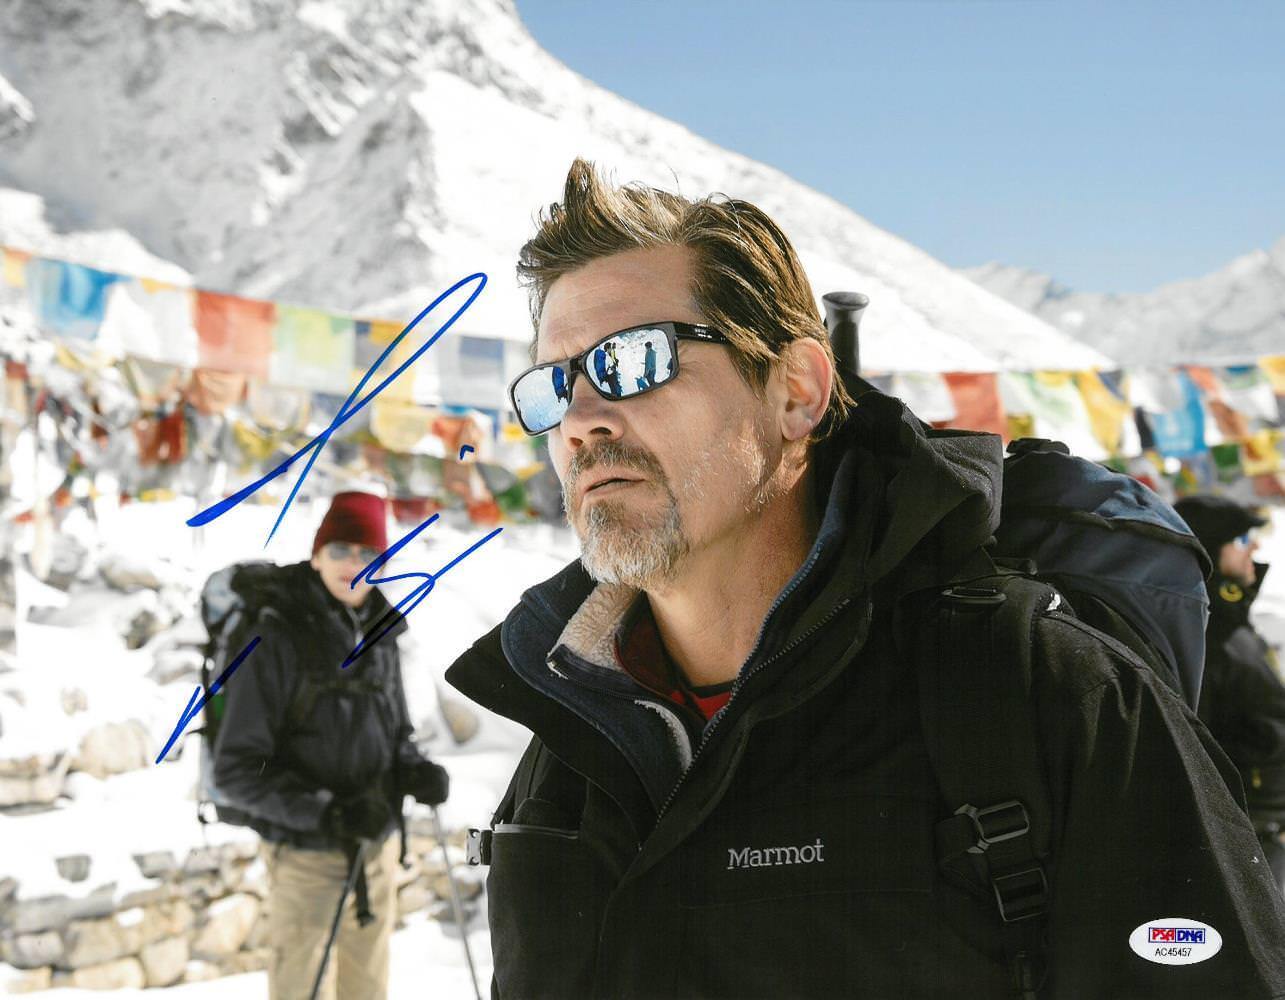 Josh Brolin Signed Everest Authentic Autographed 11x14 Photo Poster painting PSA/DNA #AC45457